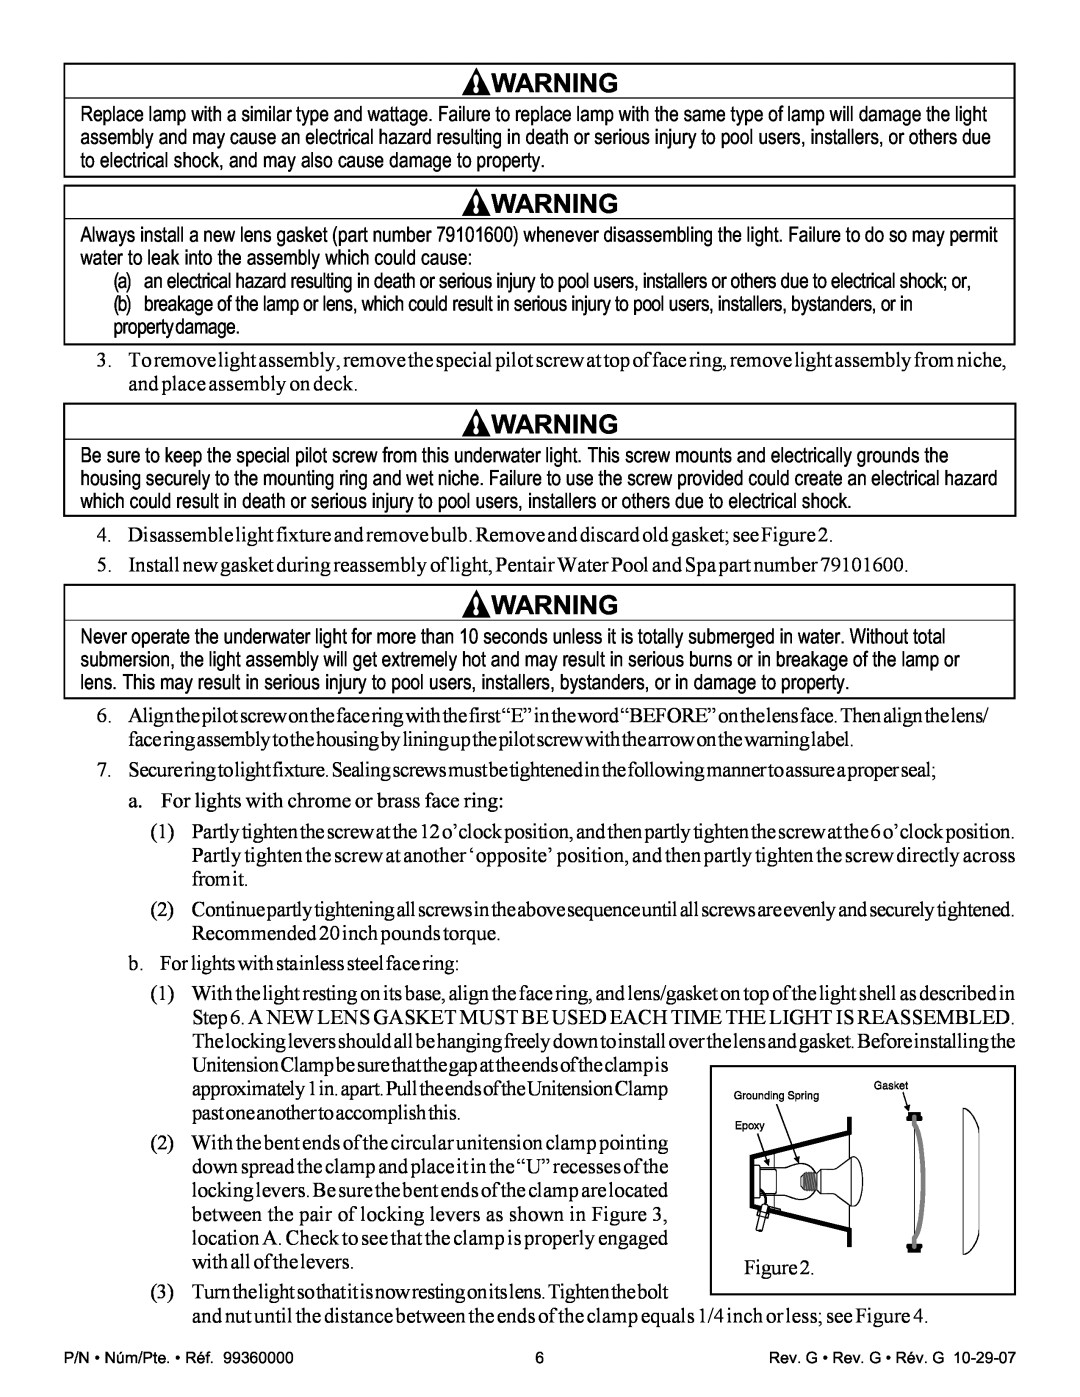 Pentair Amerlite important safety instructions a. For lights with chrome or brass face ring 